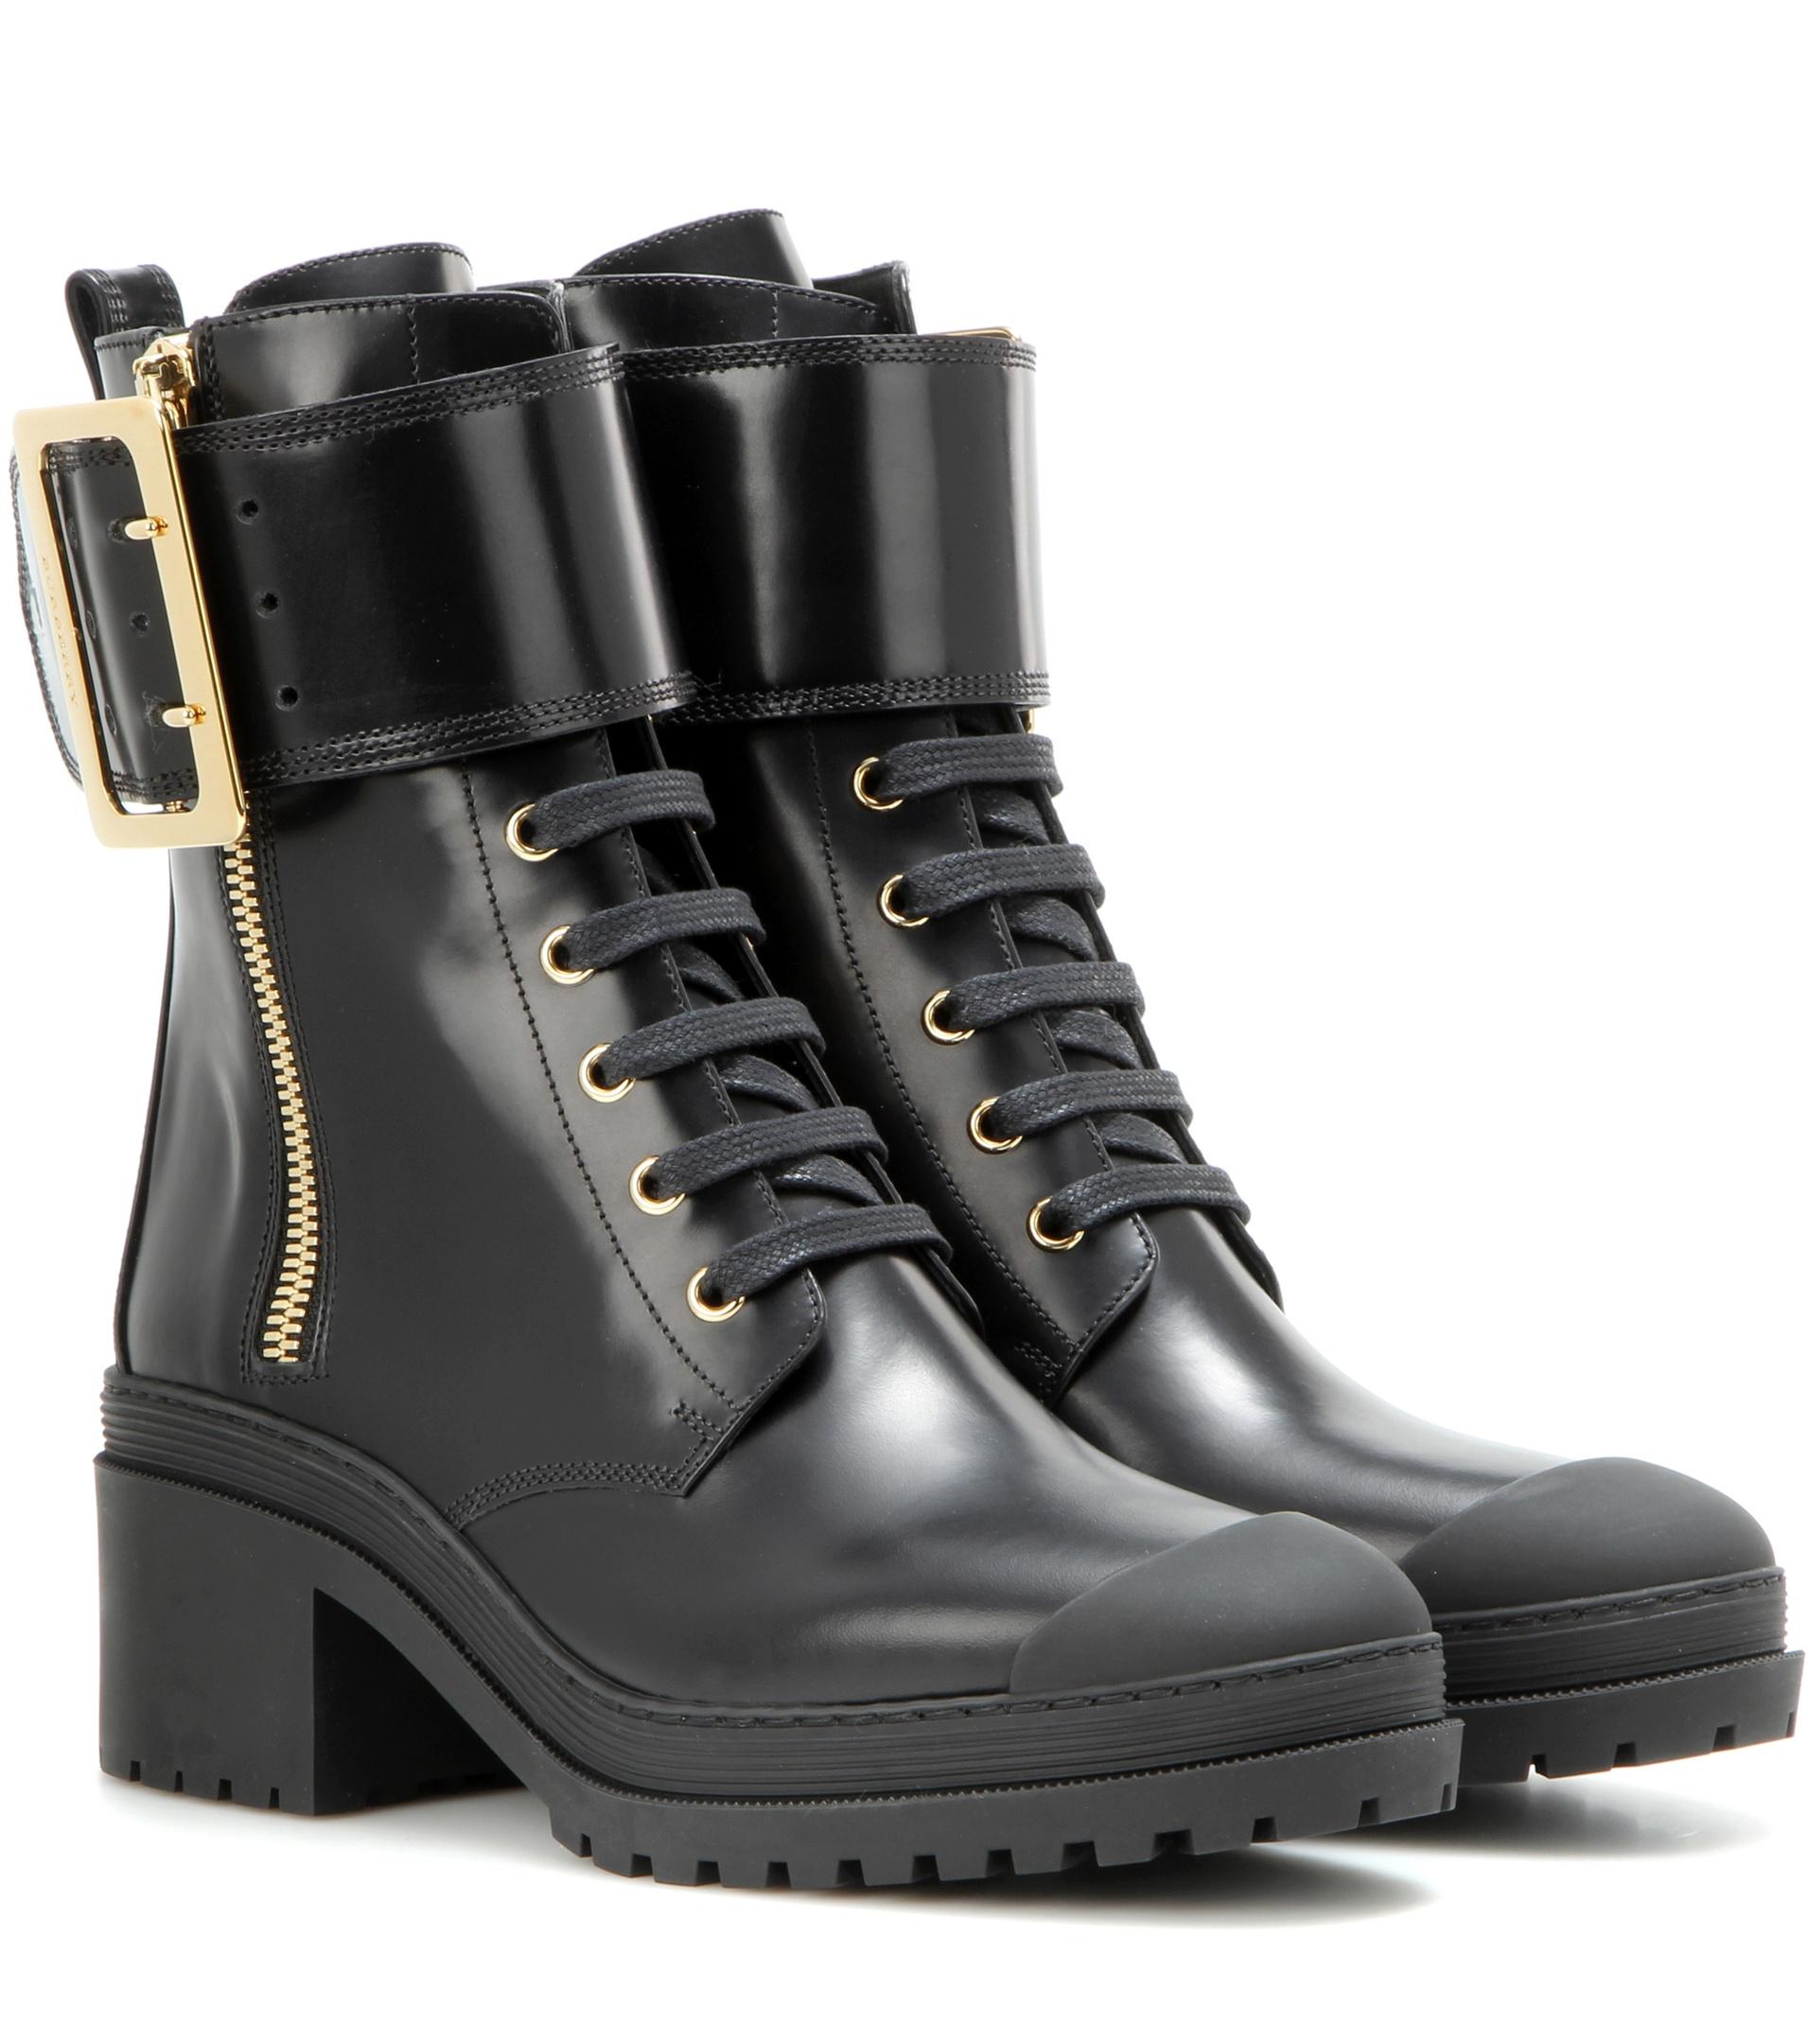 Burberry Scarcroft Leather Boots in Black - Lyst